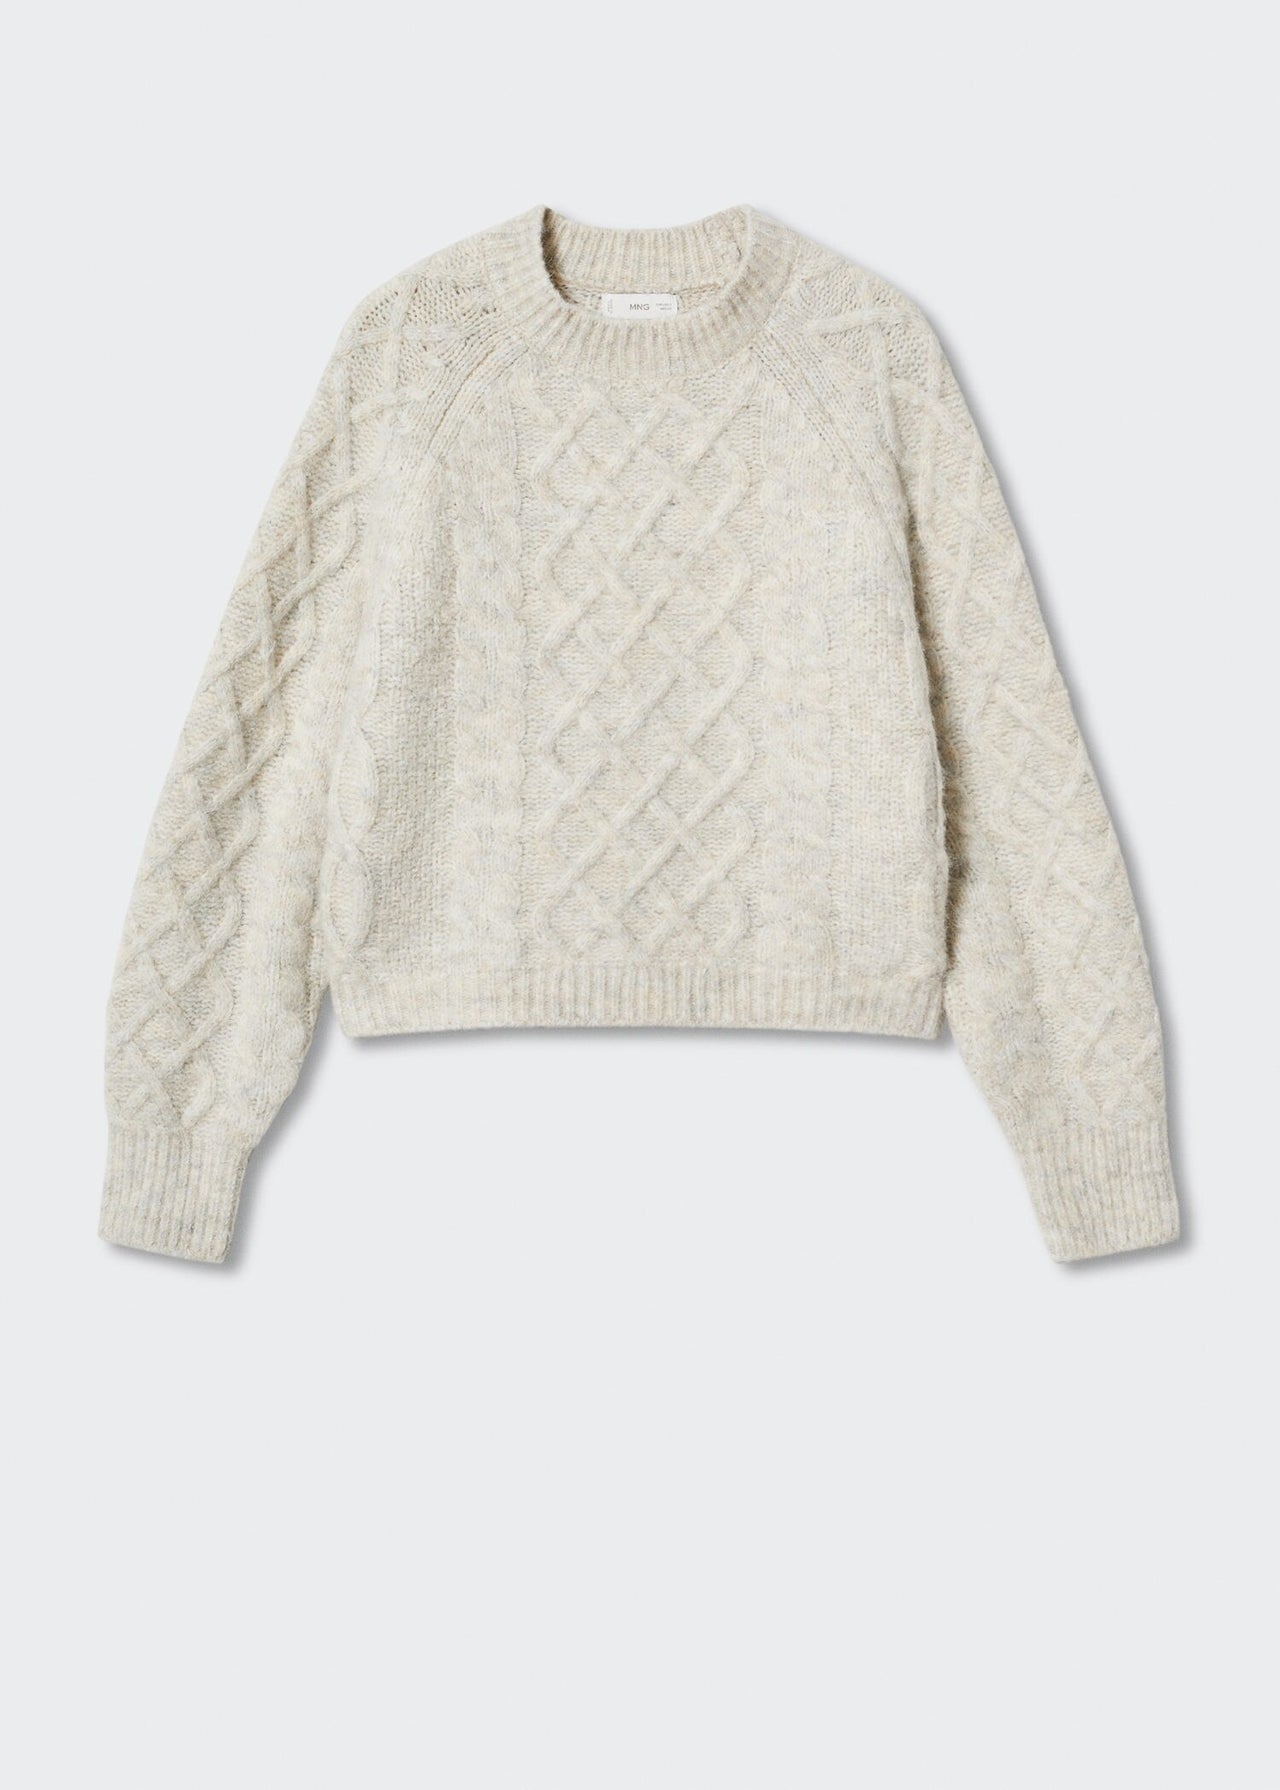 Cable-knit sweater